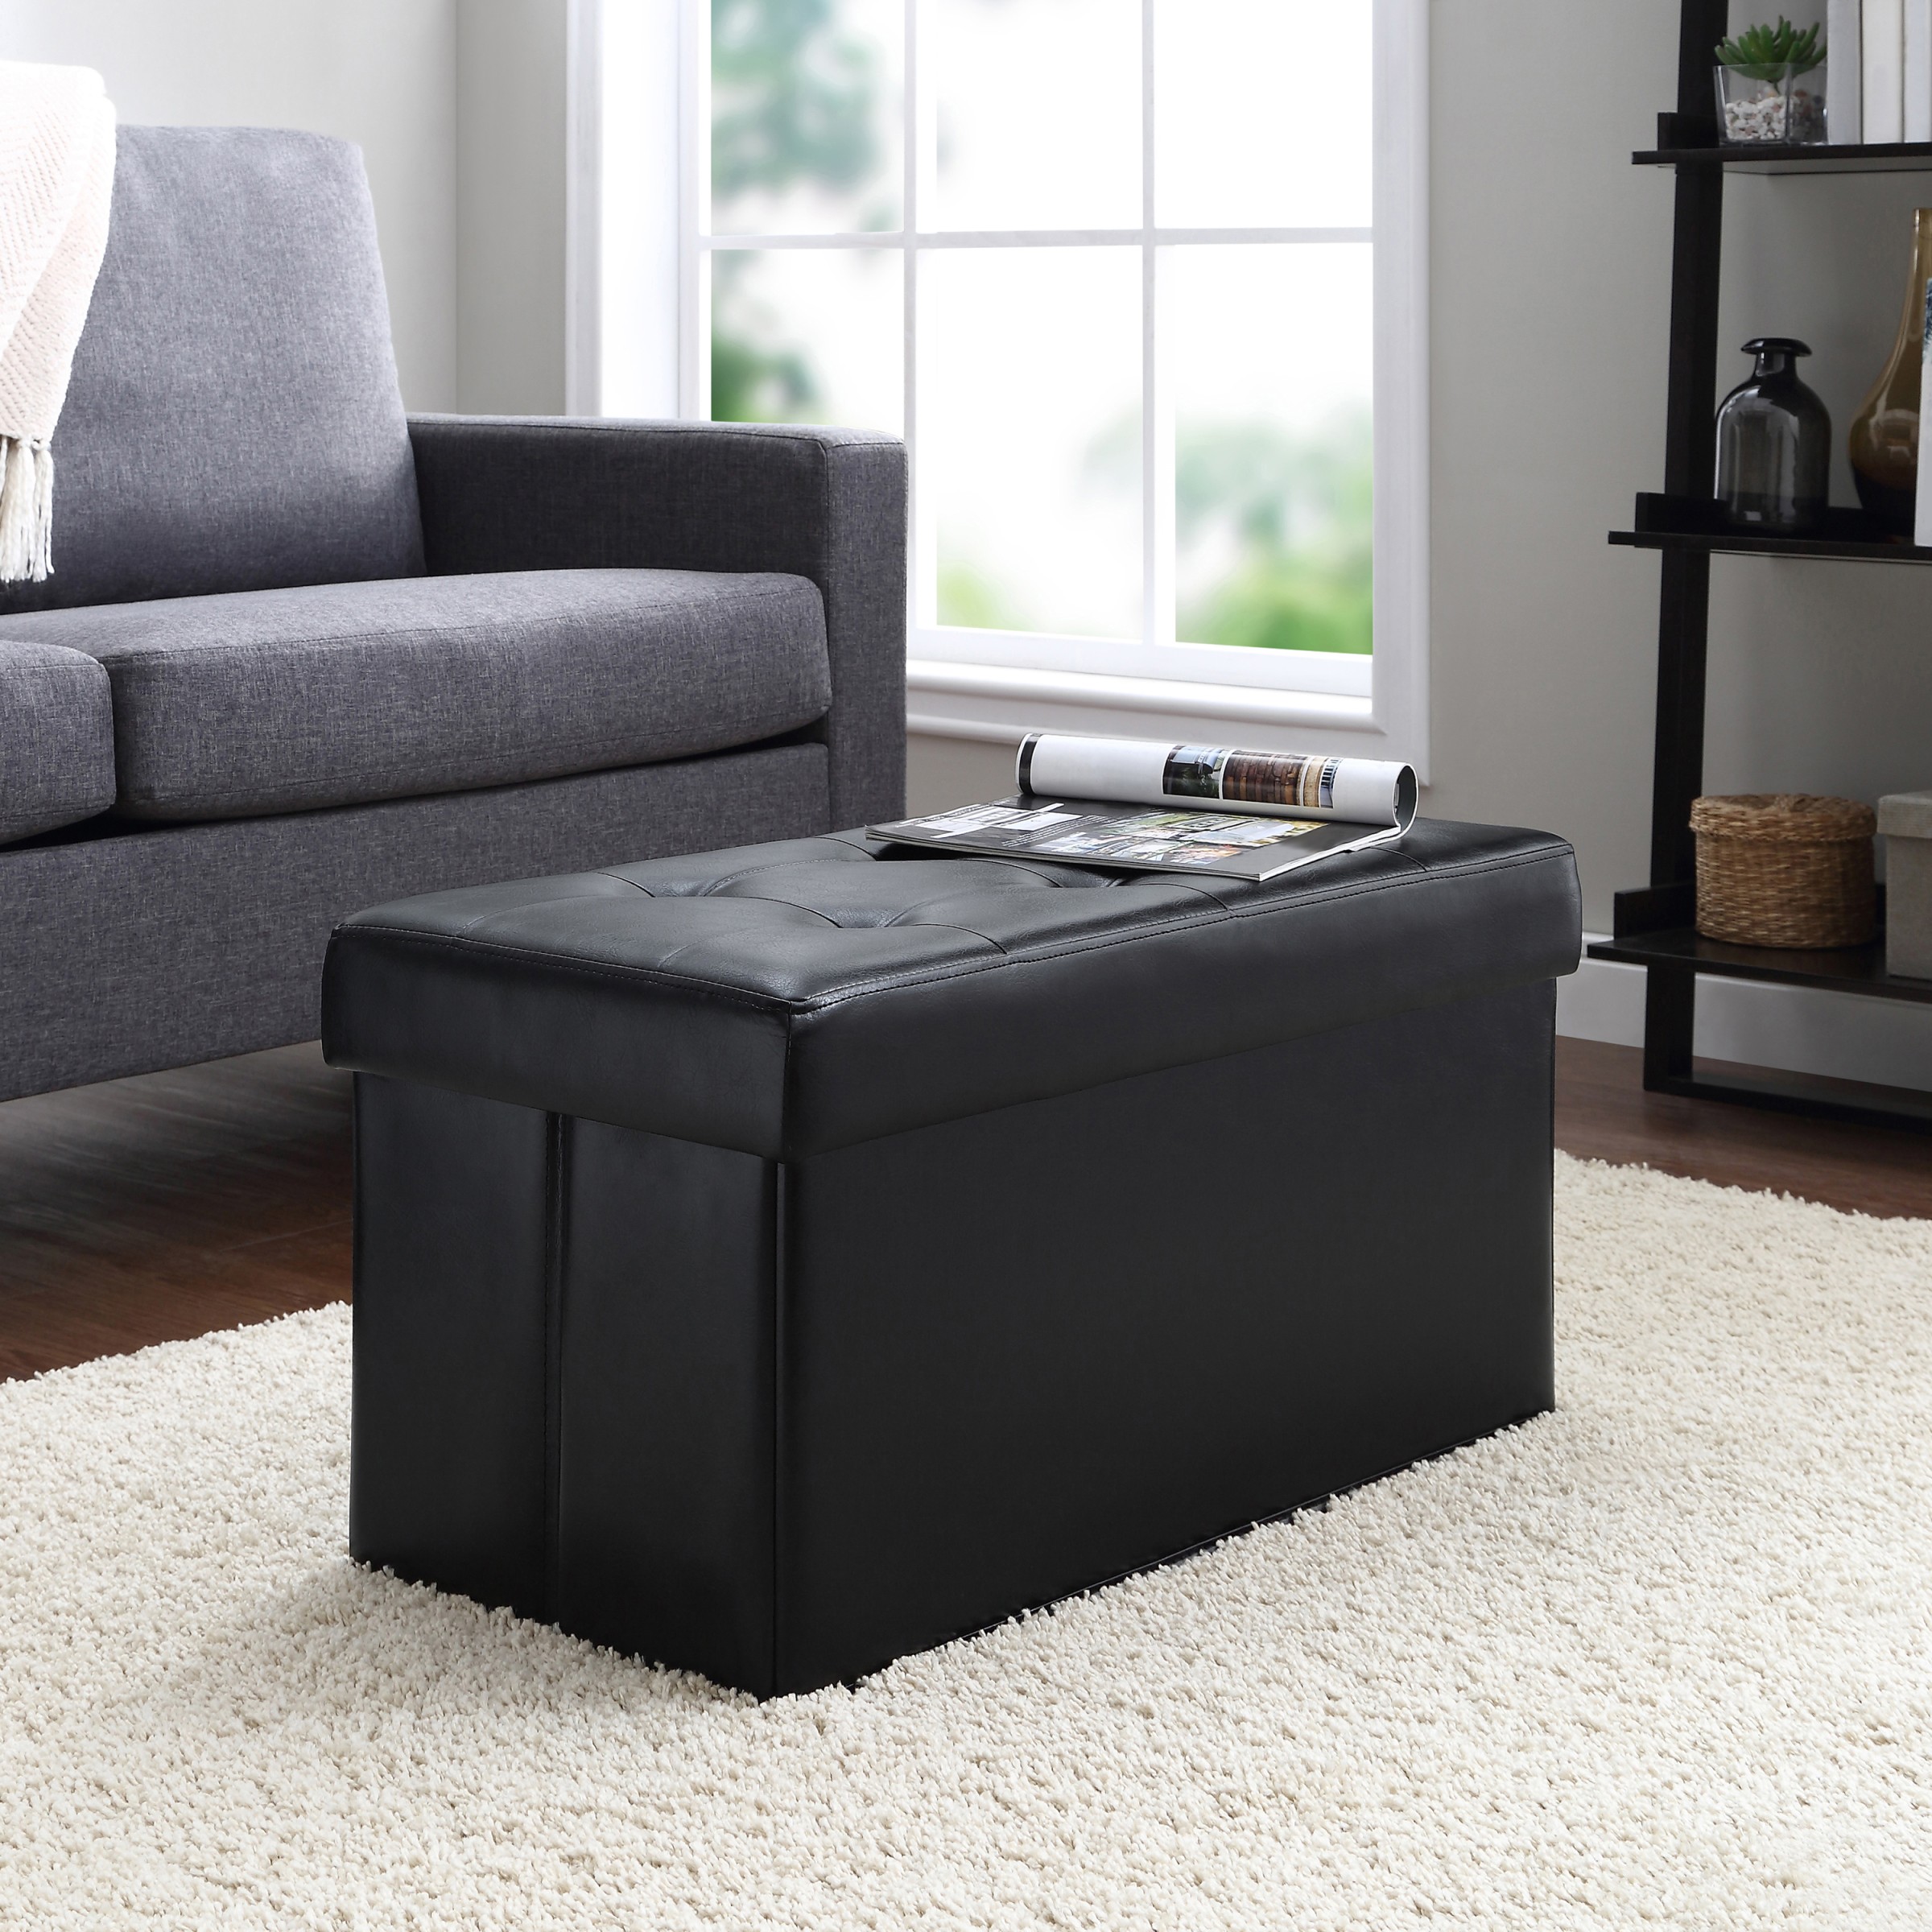 Mainstays 30-inch Collapsible Storage Ottoman, Quilted Black Faux Leather - image 1 of 6